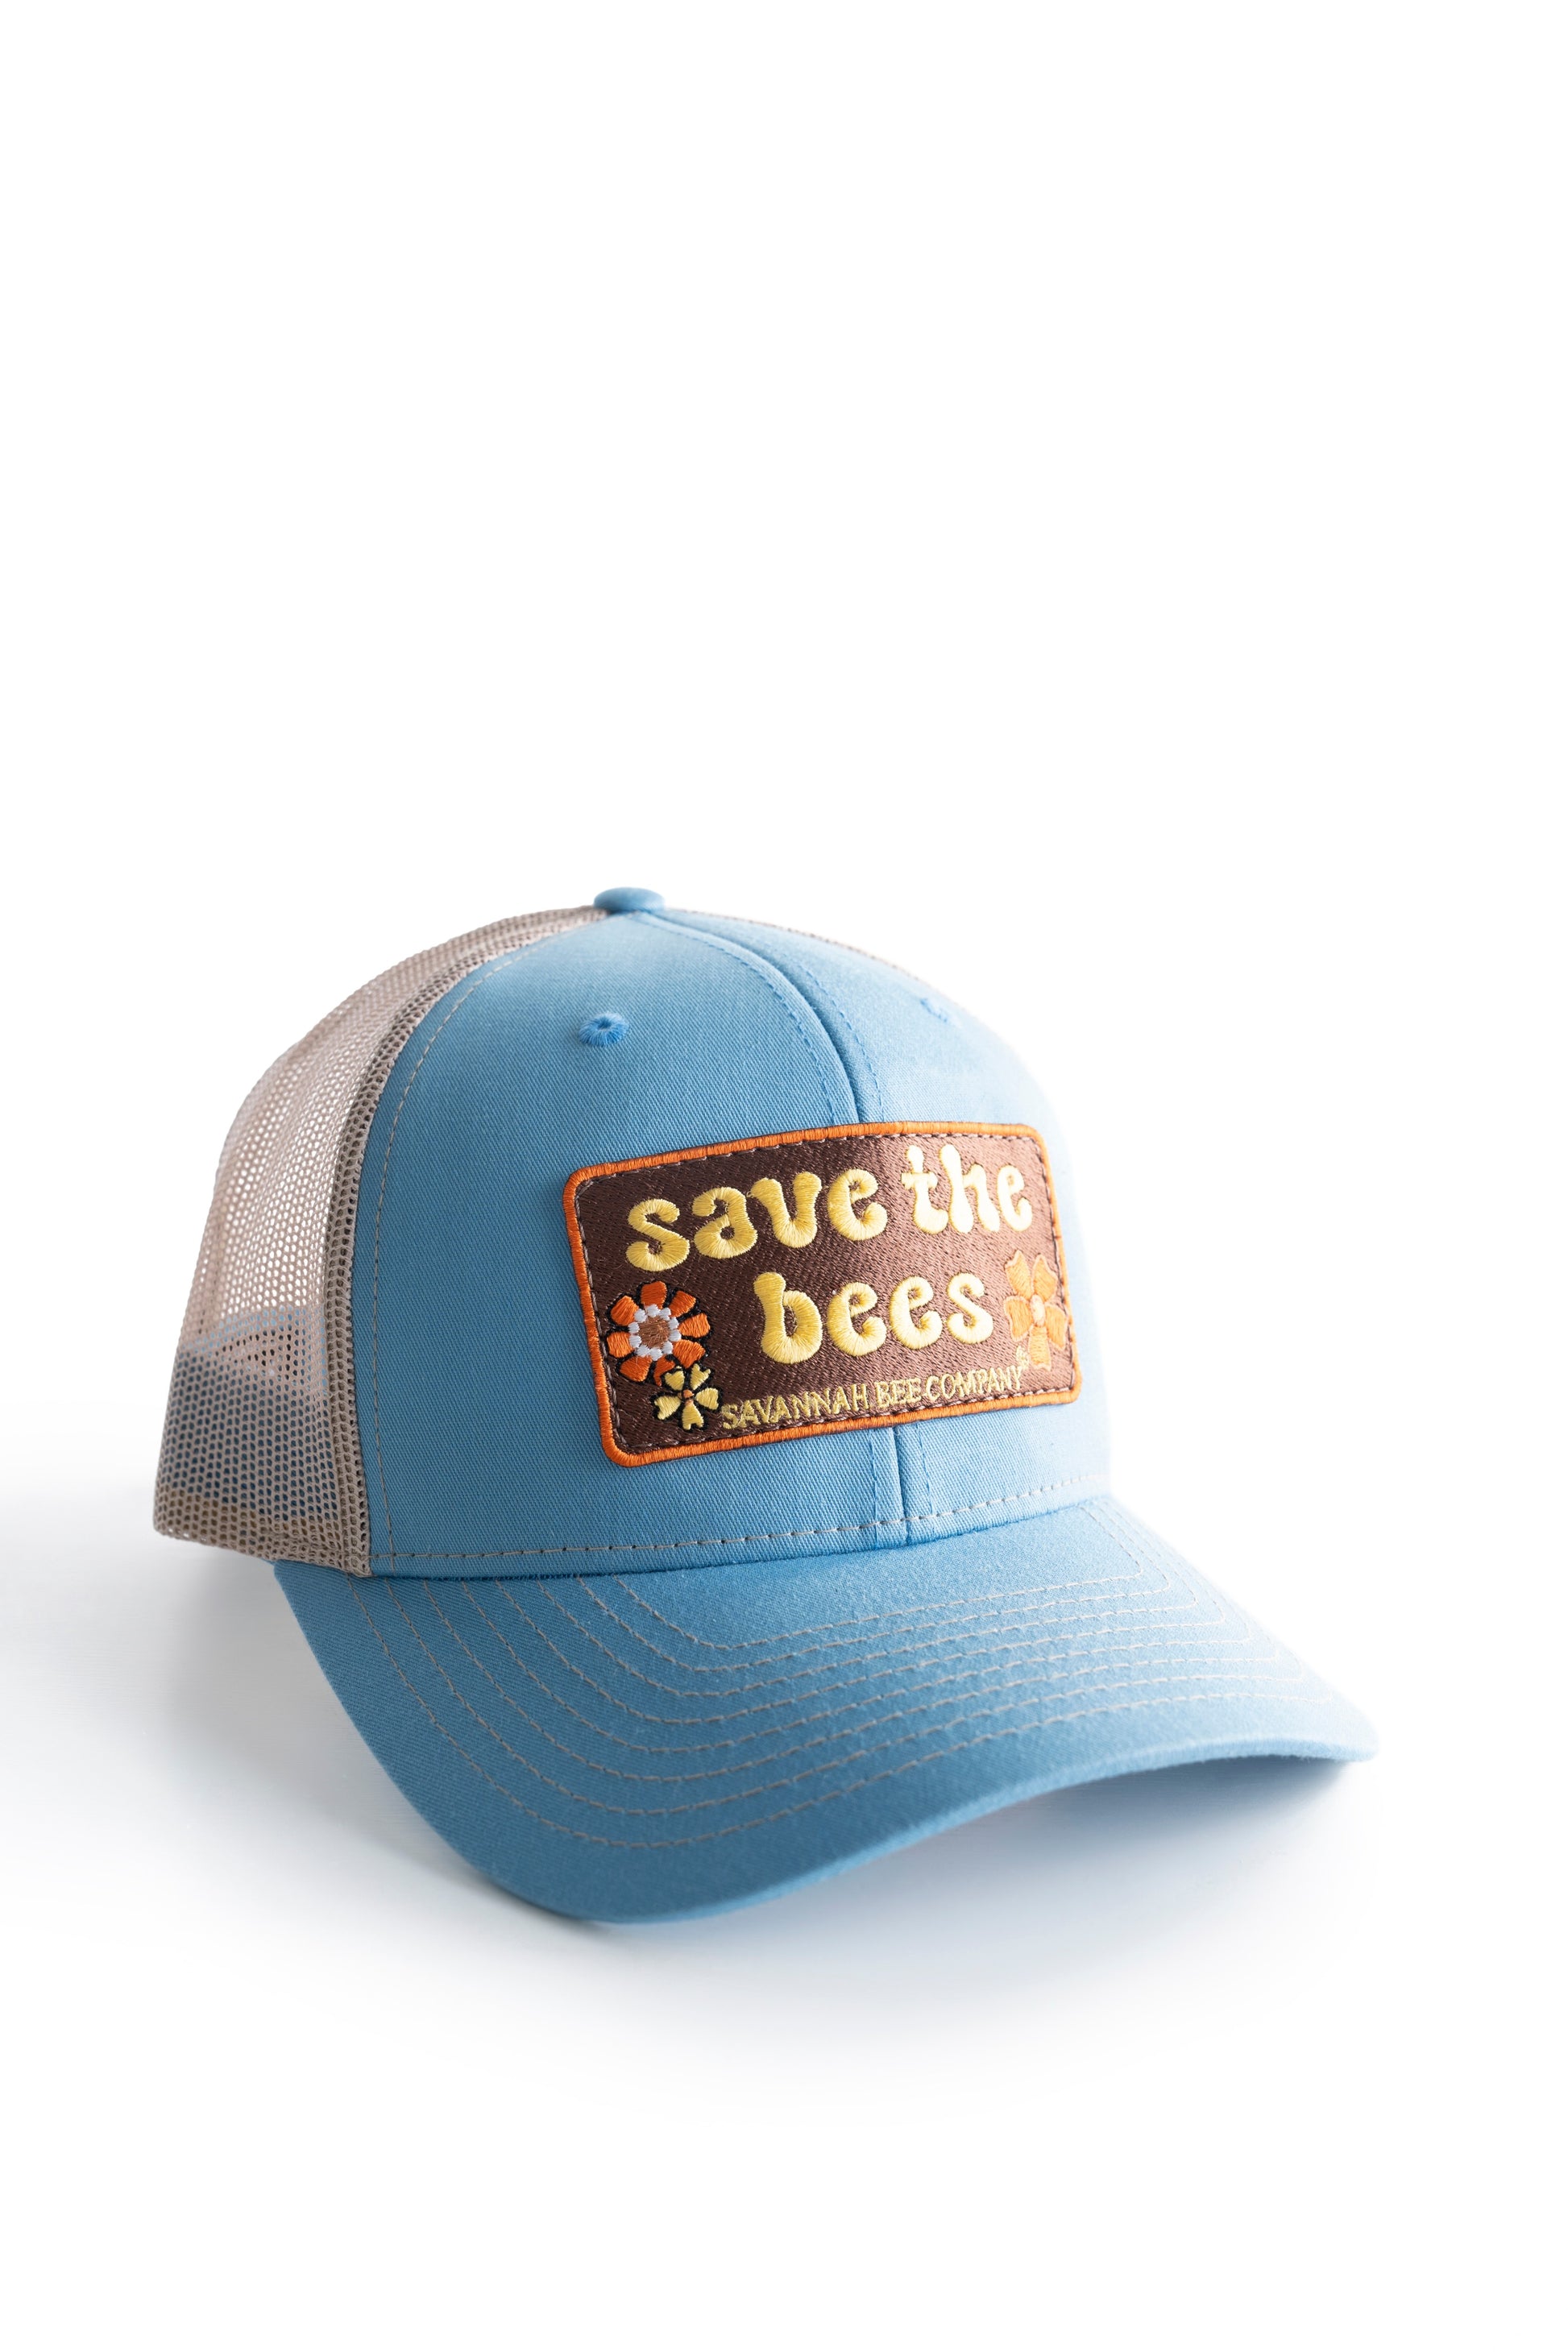 Blue save the bees trucker hat with groovy font facing right